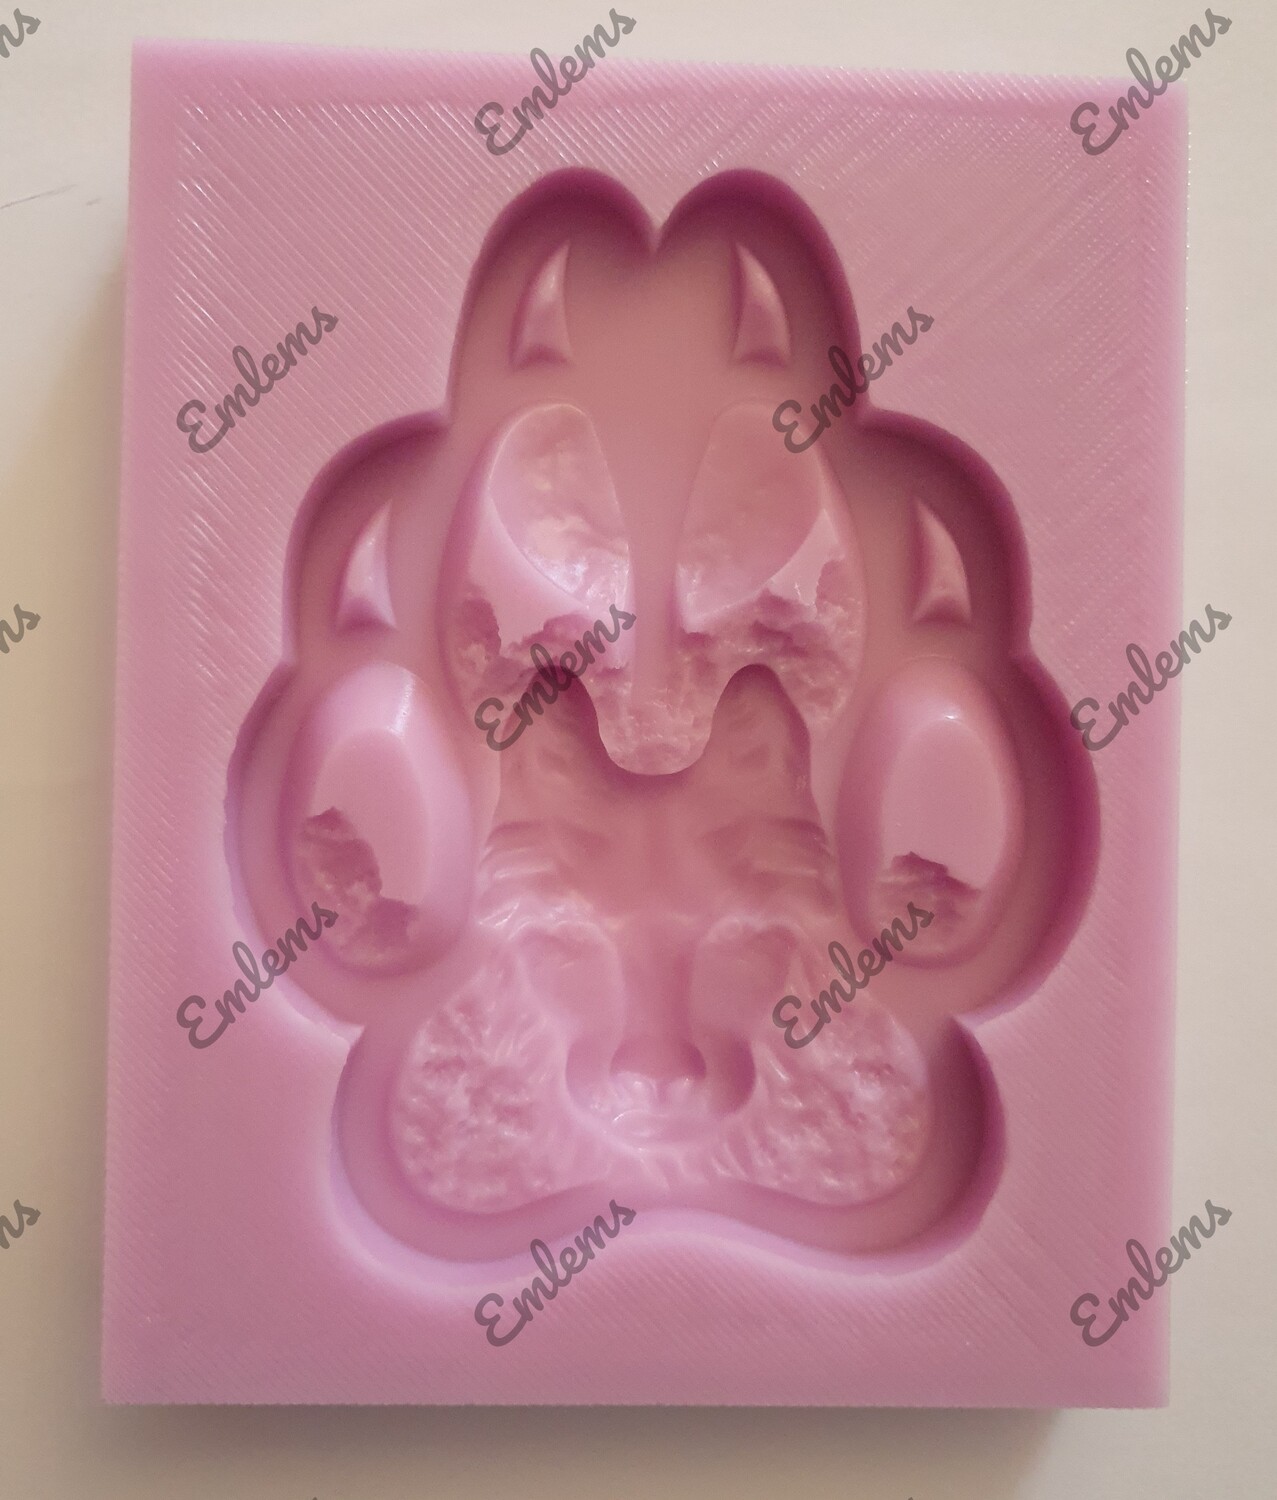 EMLEMS WOLF FOOT PRINT FACE MOON SILICONE MOULD